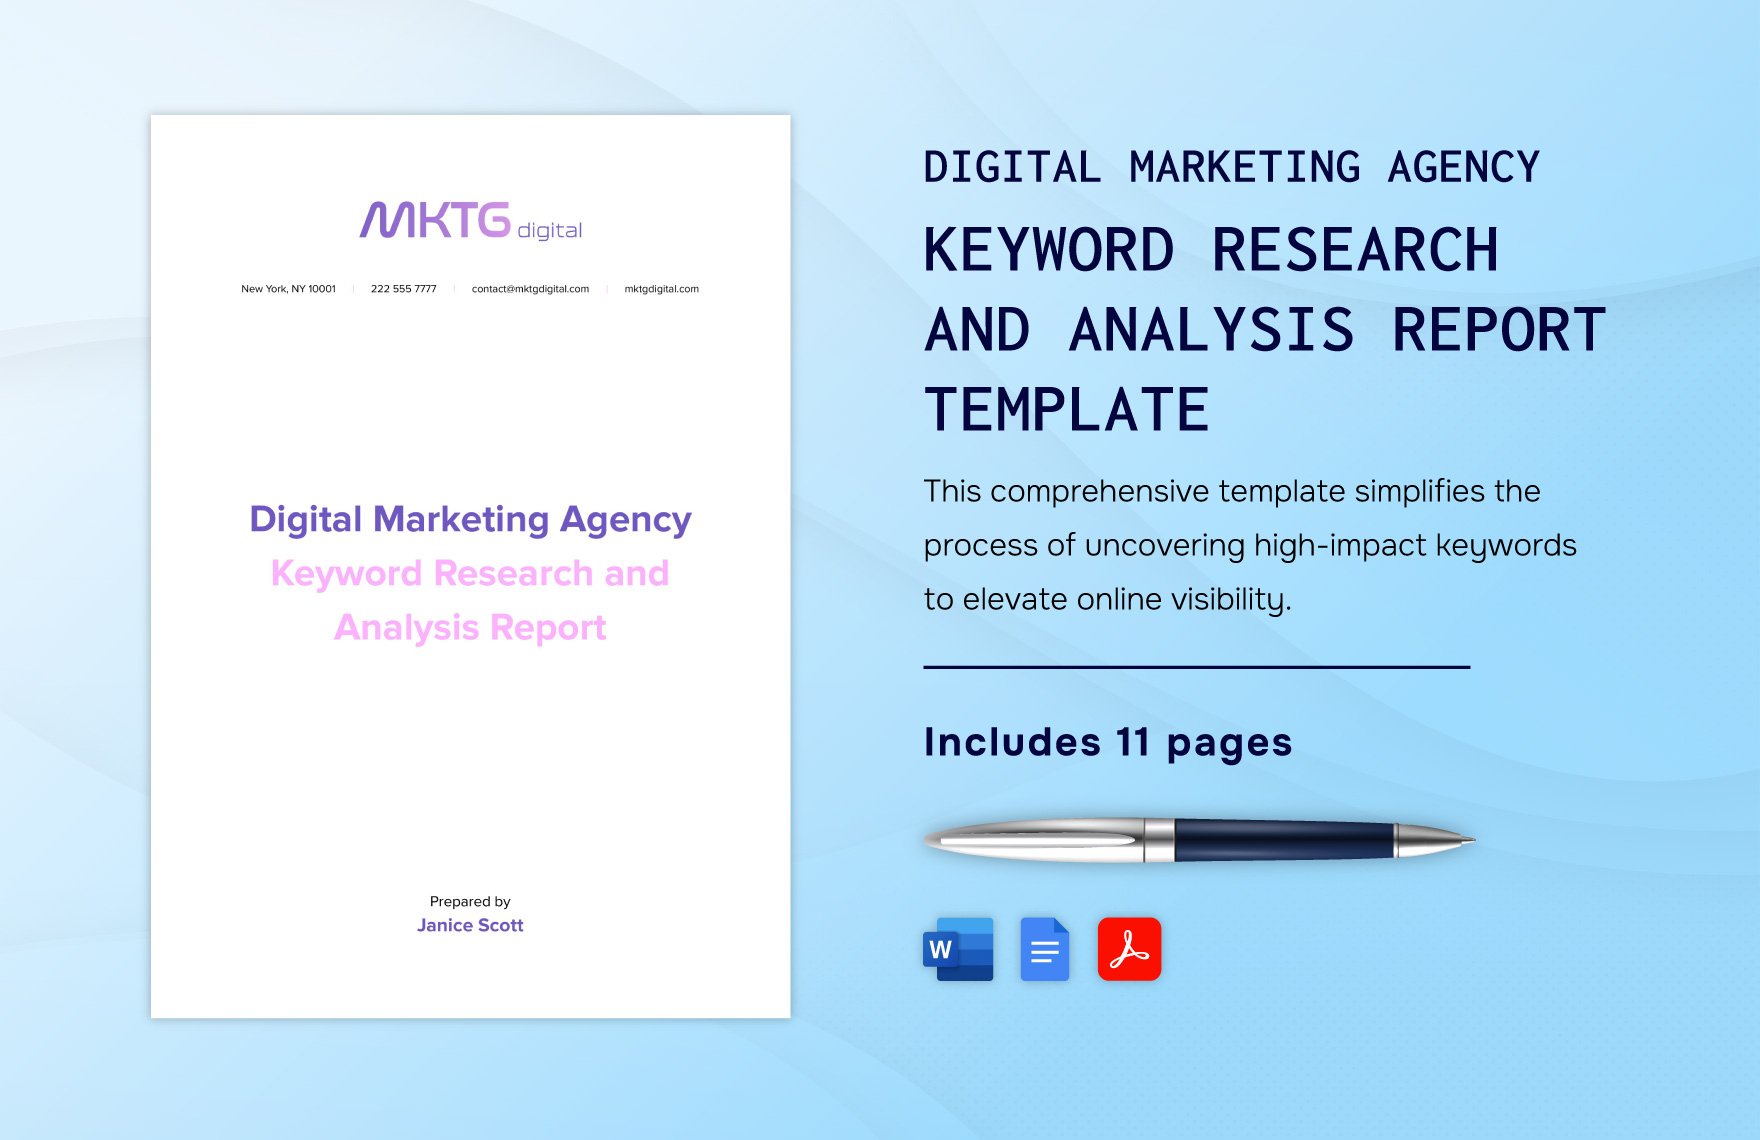 Digital Marketing Agency Keyword Research and Analysis Report Template